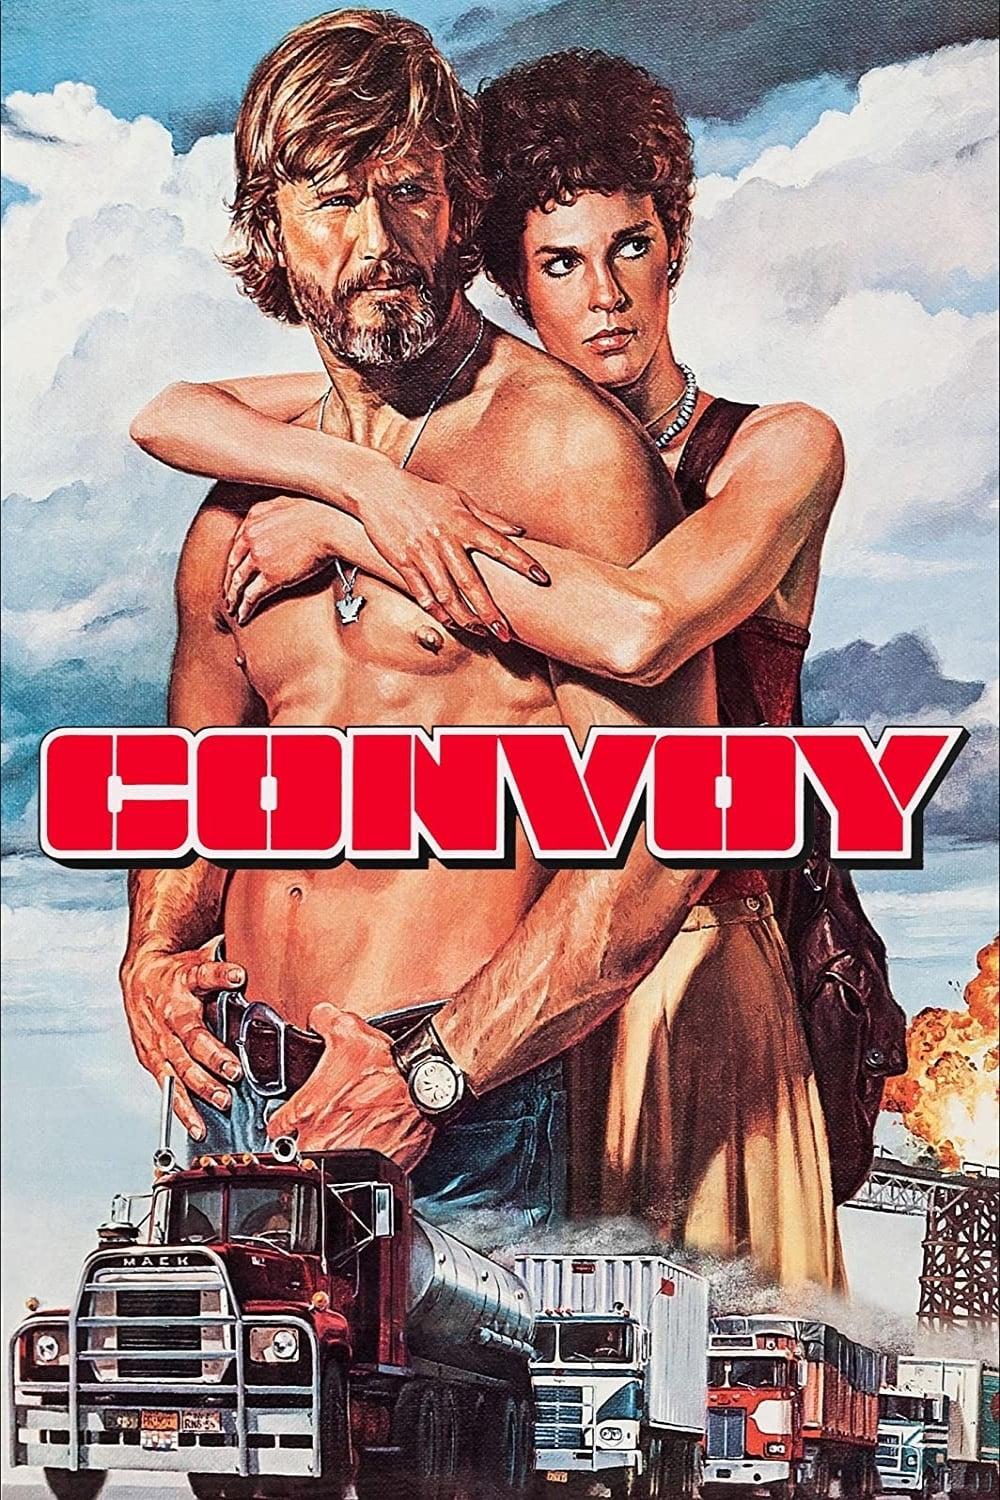 Convoy poster